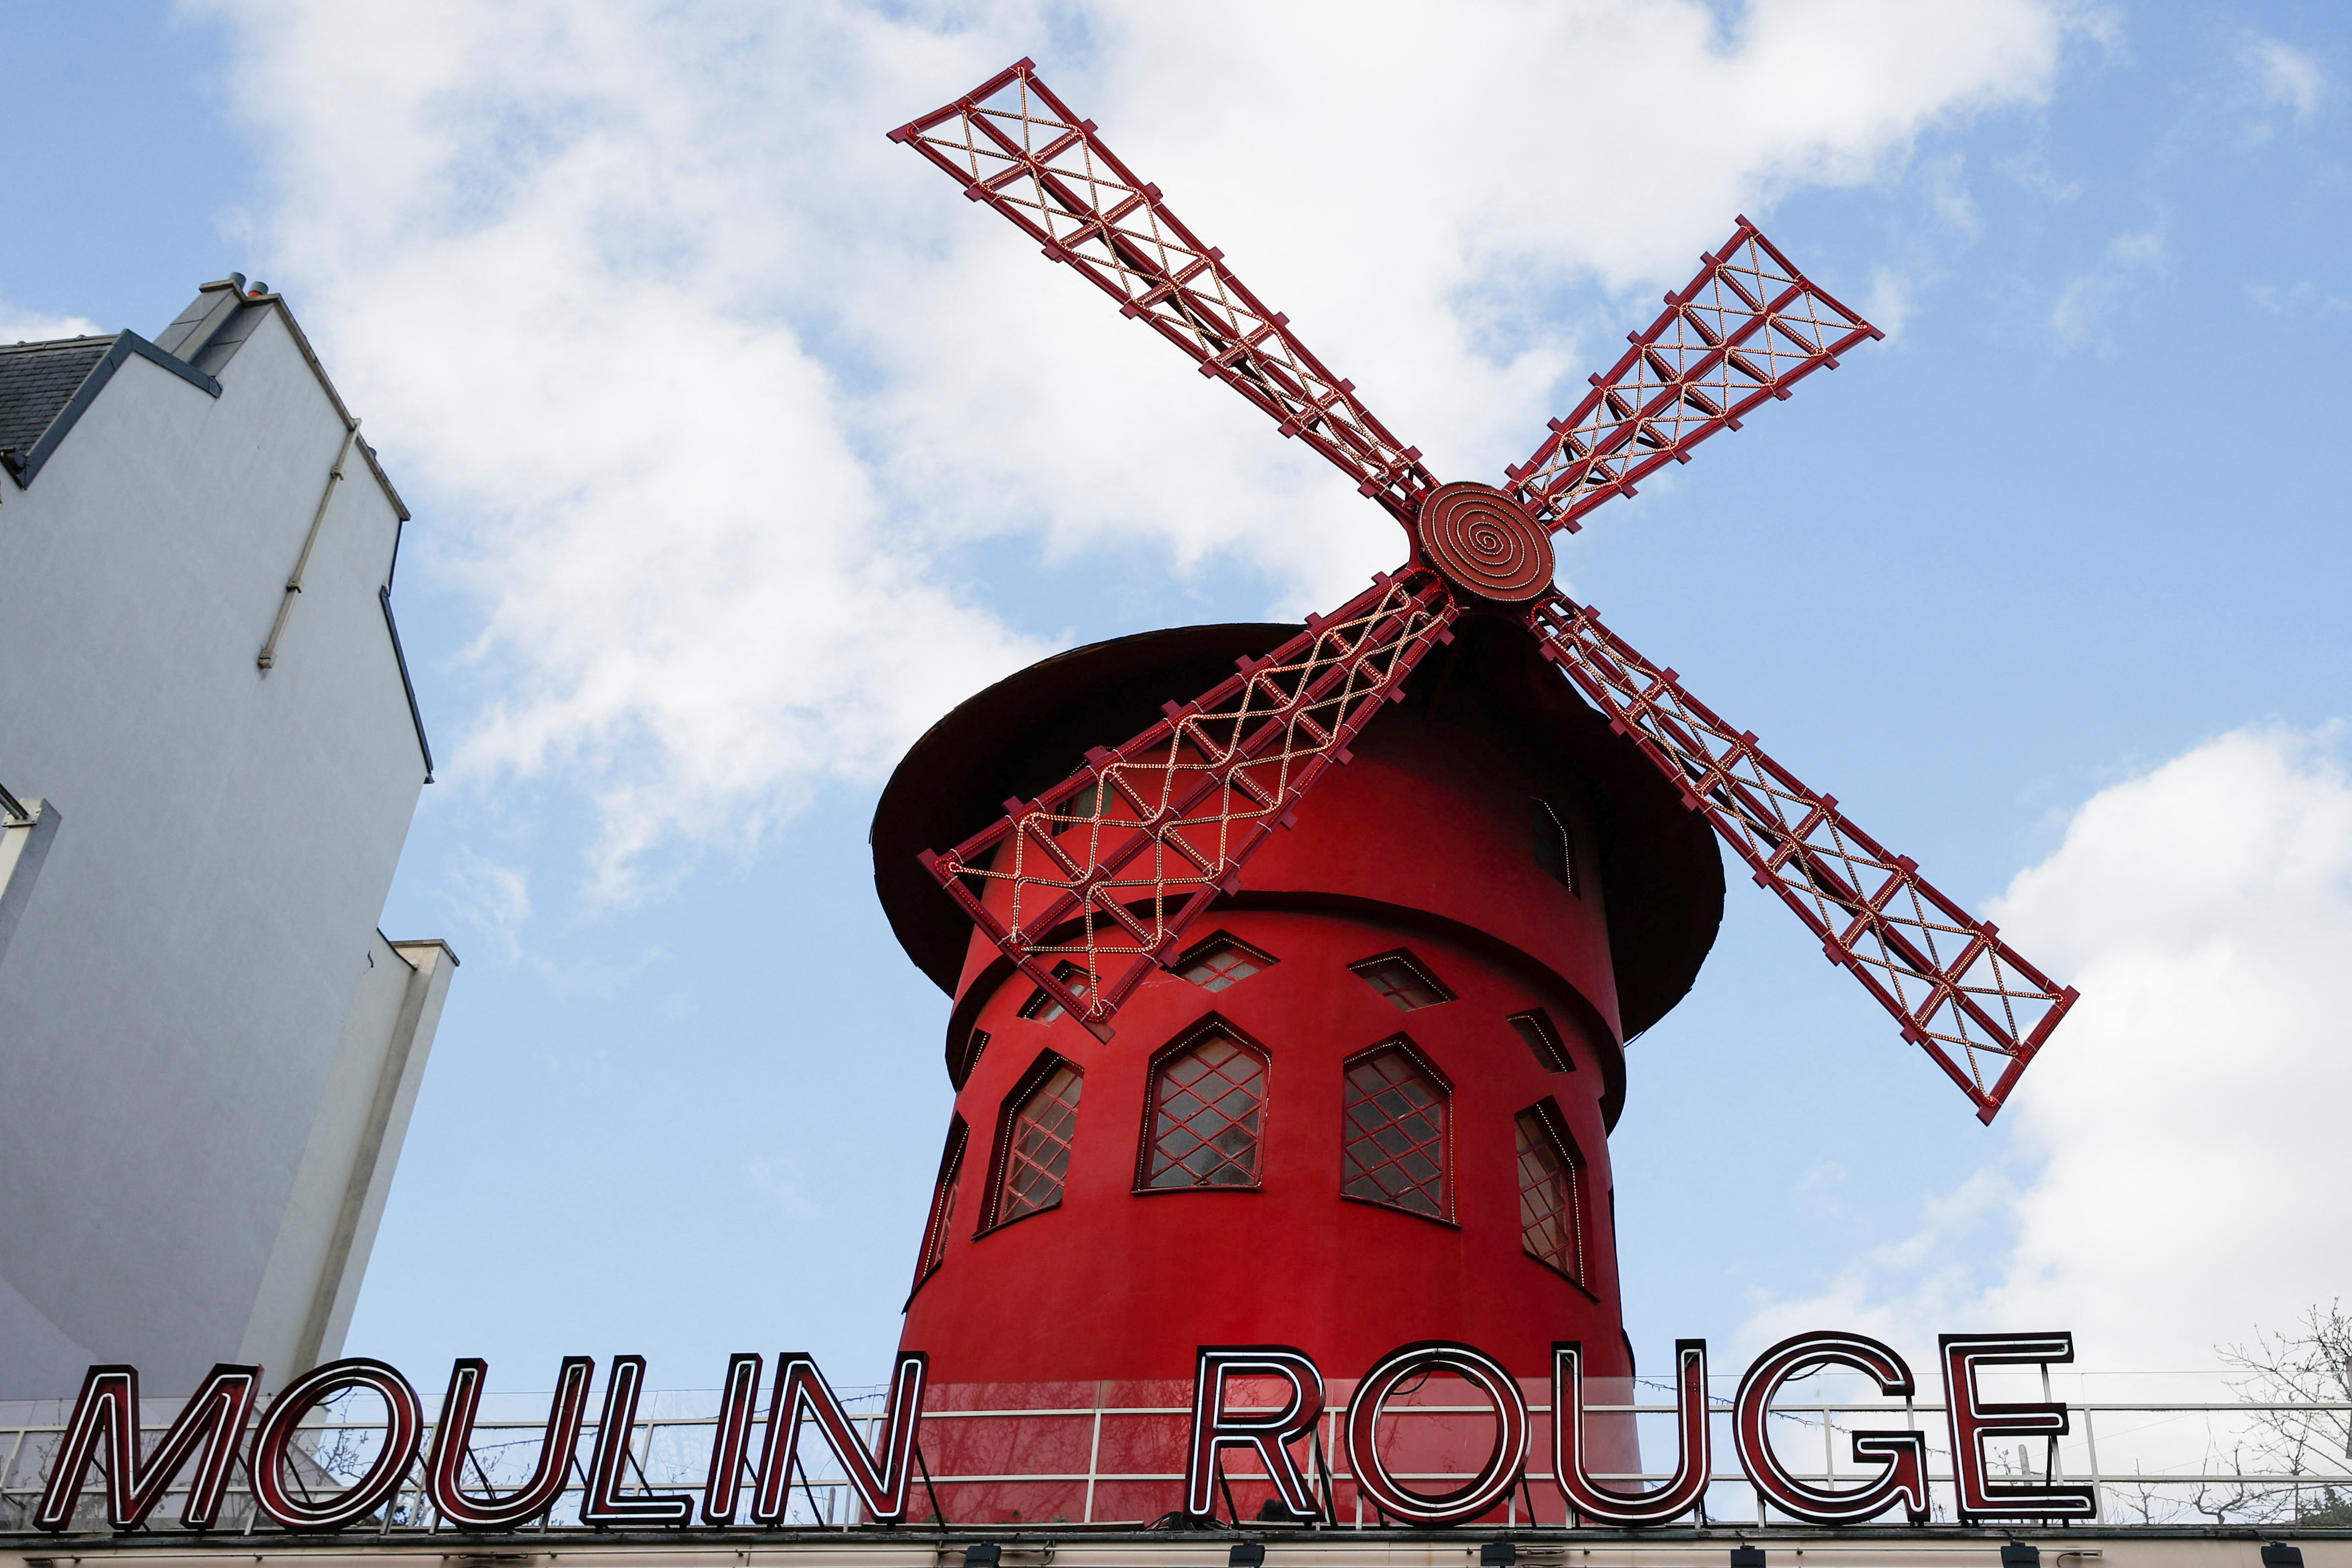 The Moulin Rouge sign and a red windmill above it.